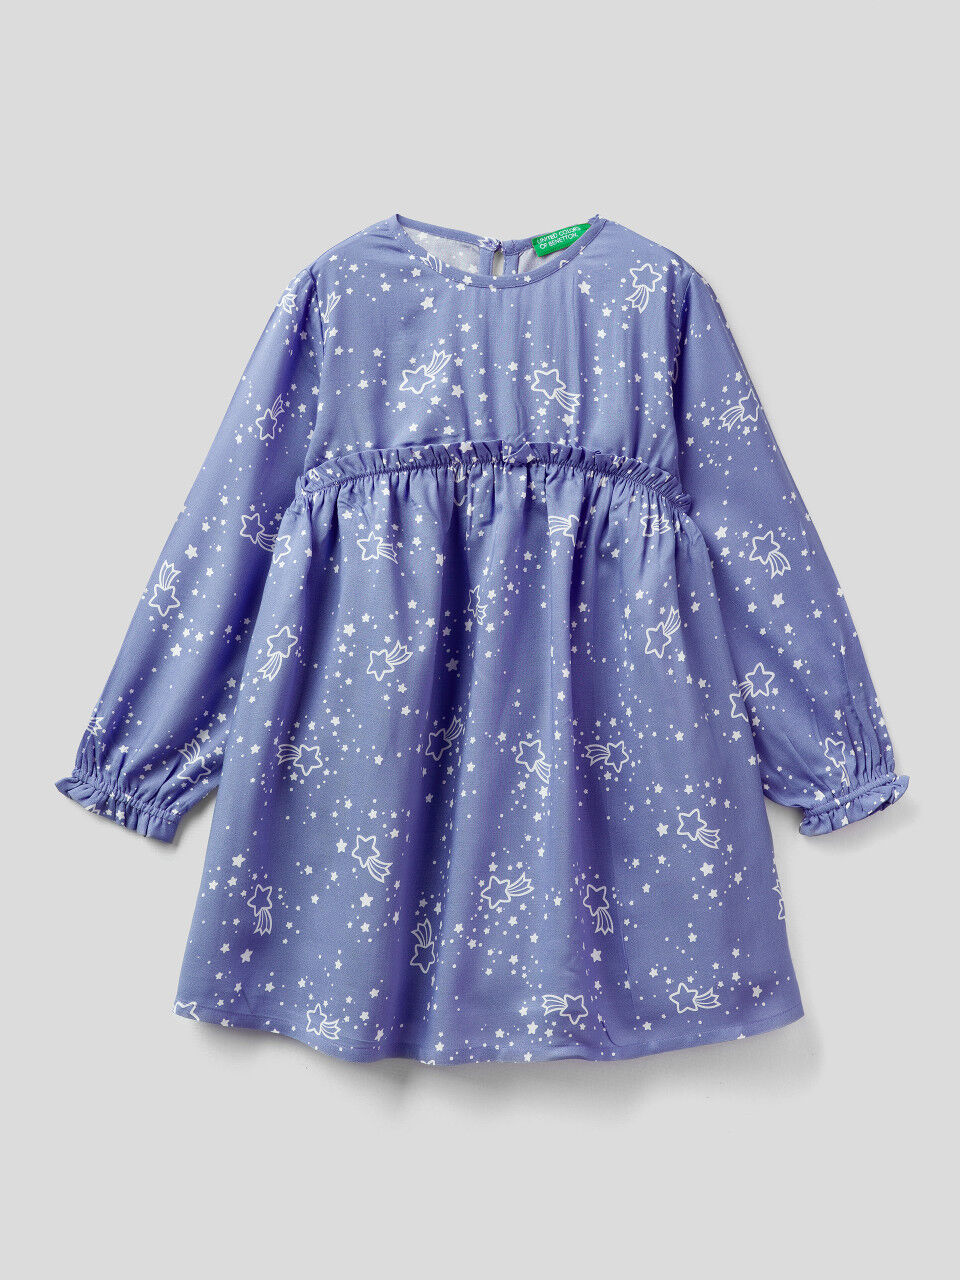 Navy Blue 3Y United colors of benetton casual dress KIDS FASHION Dresses NO STYLE discount 94% 